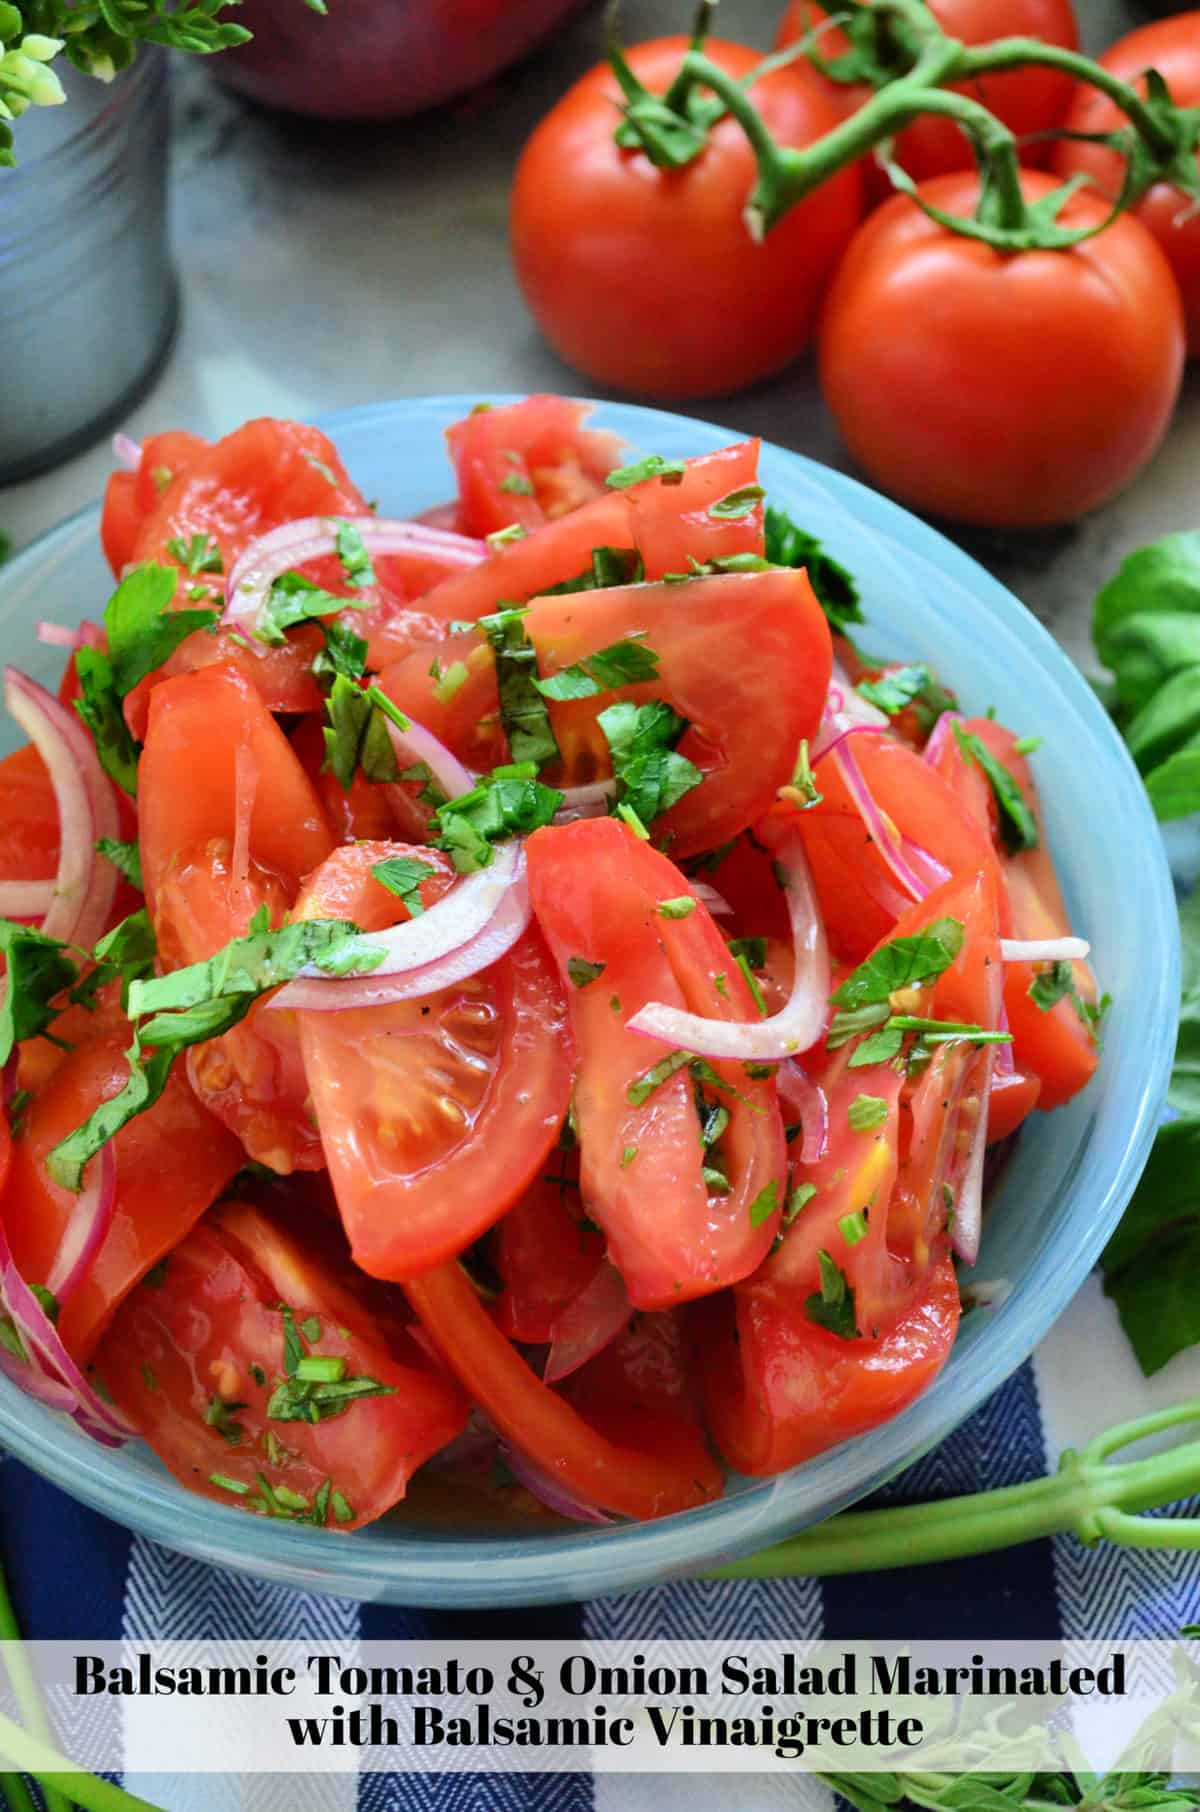 Tomatoes, red onion, basil, and dressing in bowl with whole tomatoes in background. title text.